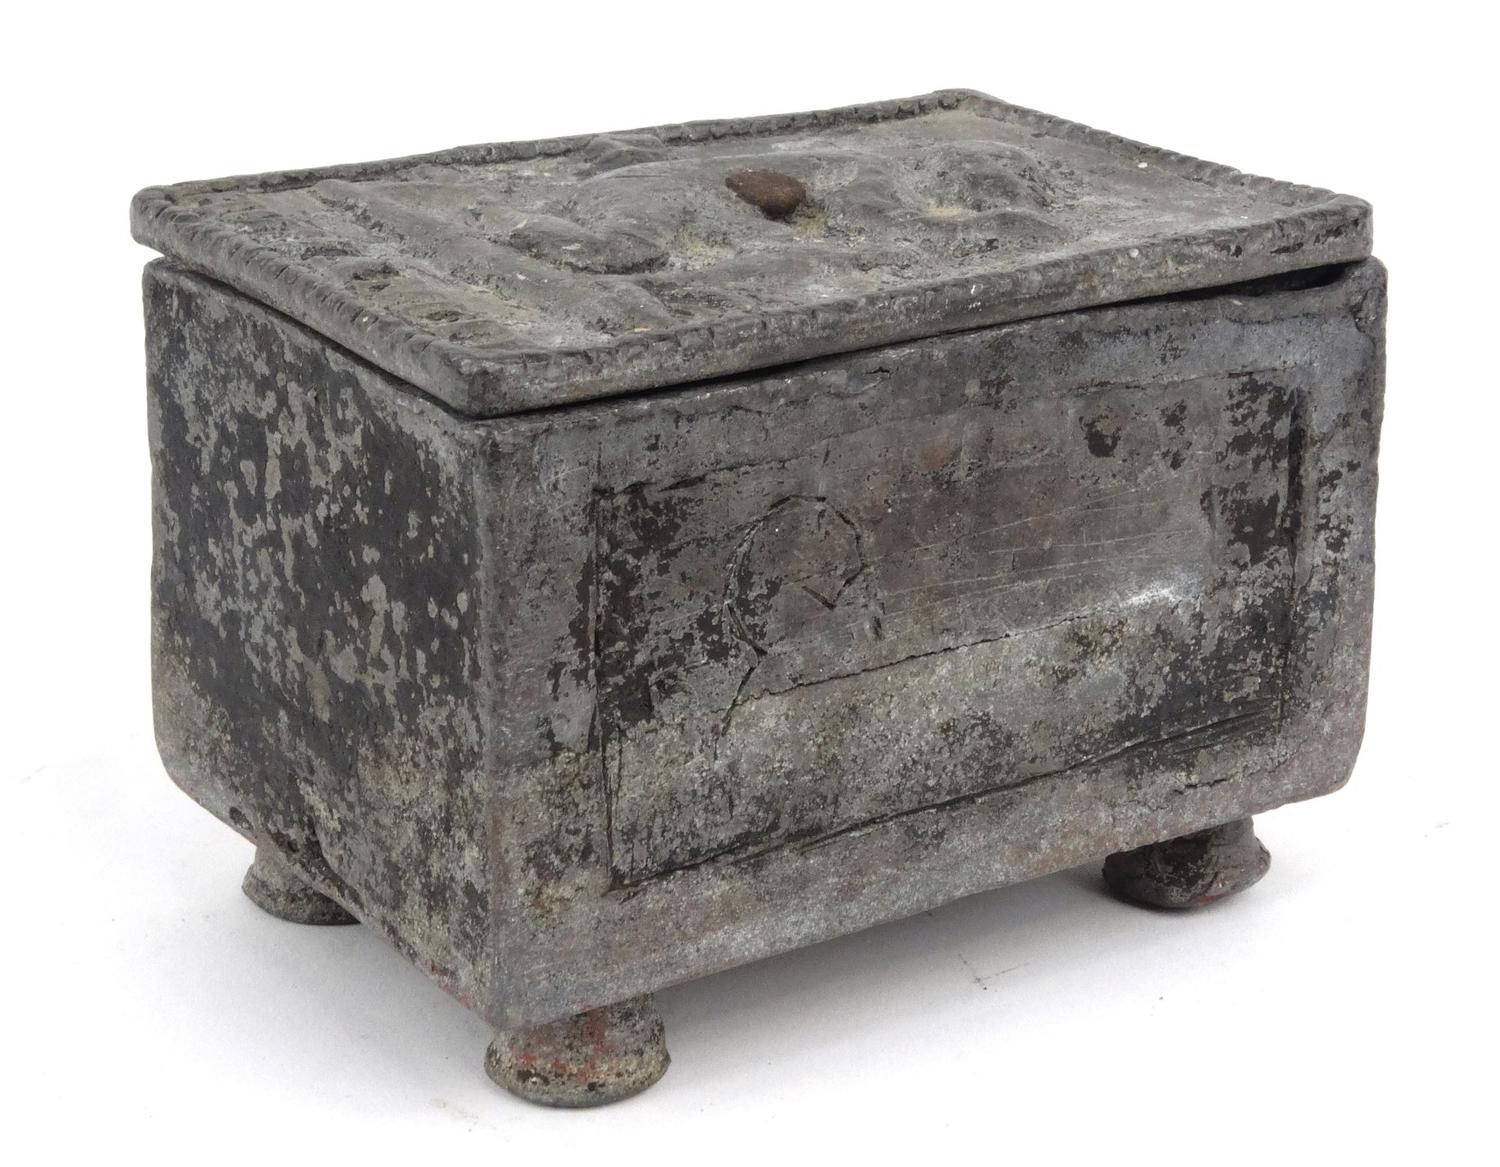 Antique lead slavery interest box, the top decorated with a man and marked 'Humanity', 13.5cm